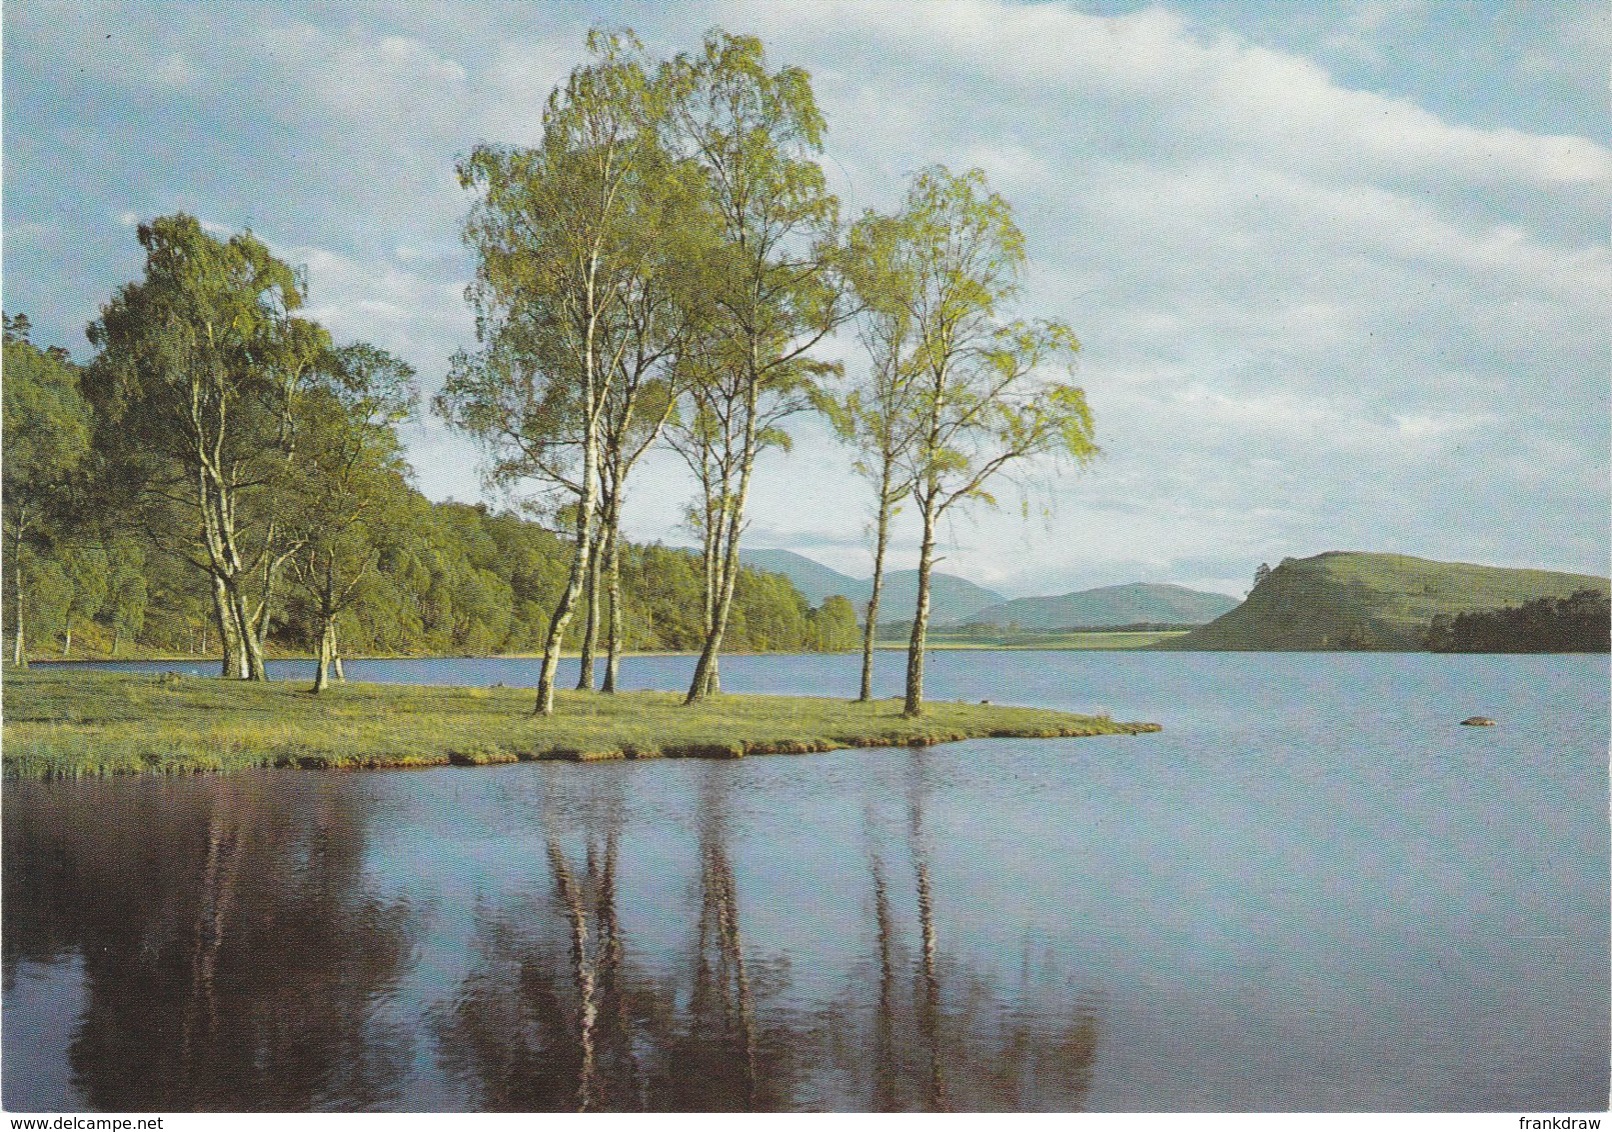 Postcard - Inverness - Shire - Silver Birches By Loch Pityoulish - Card No.85485 Unused Very Good - Unclassified